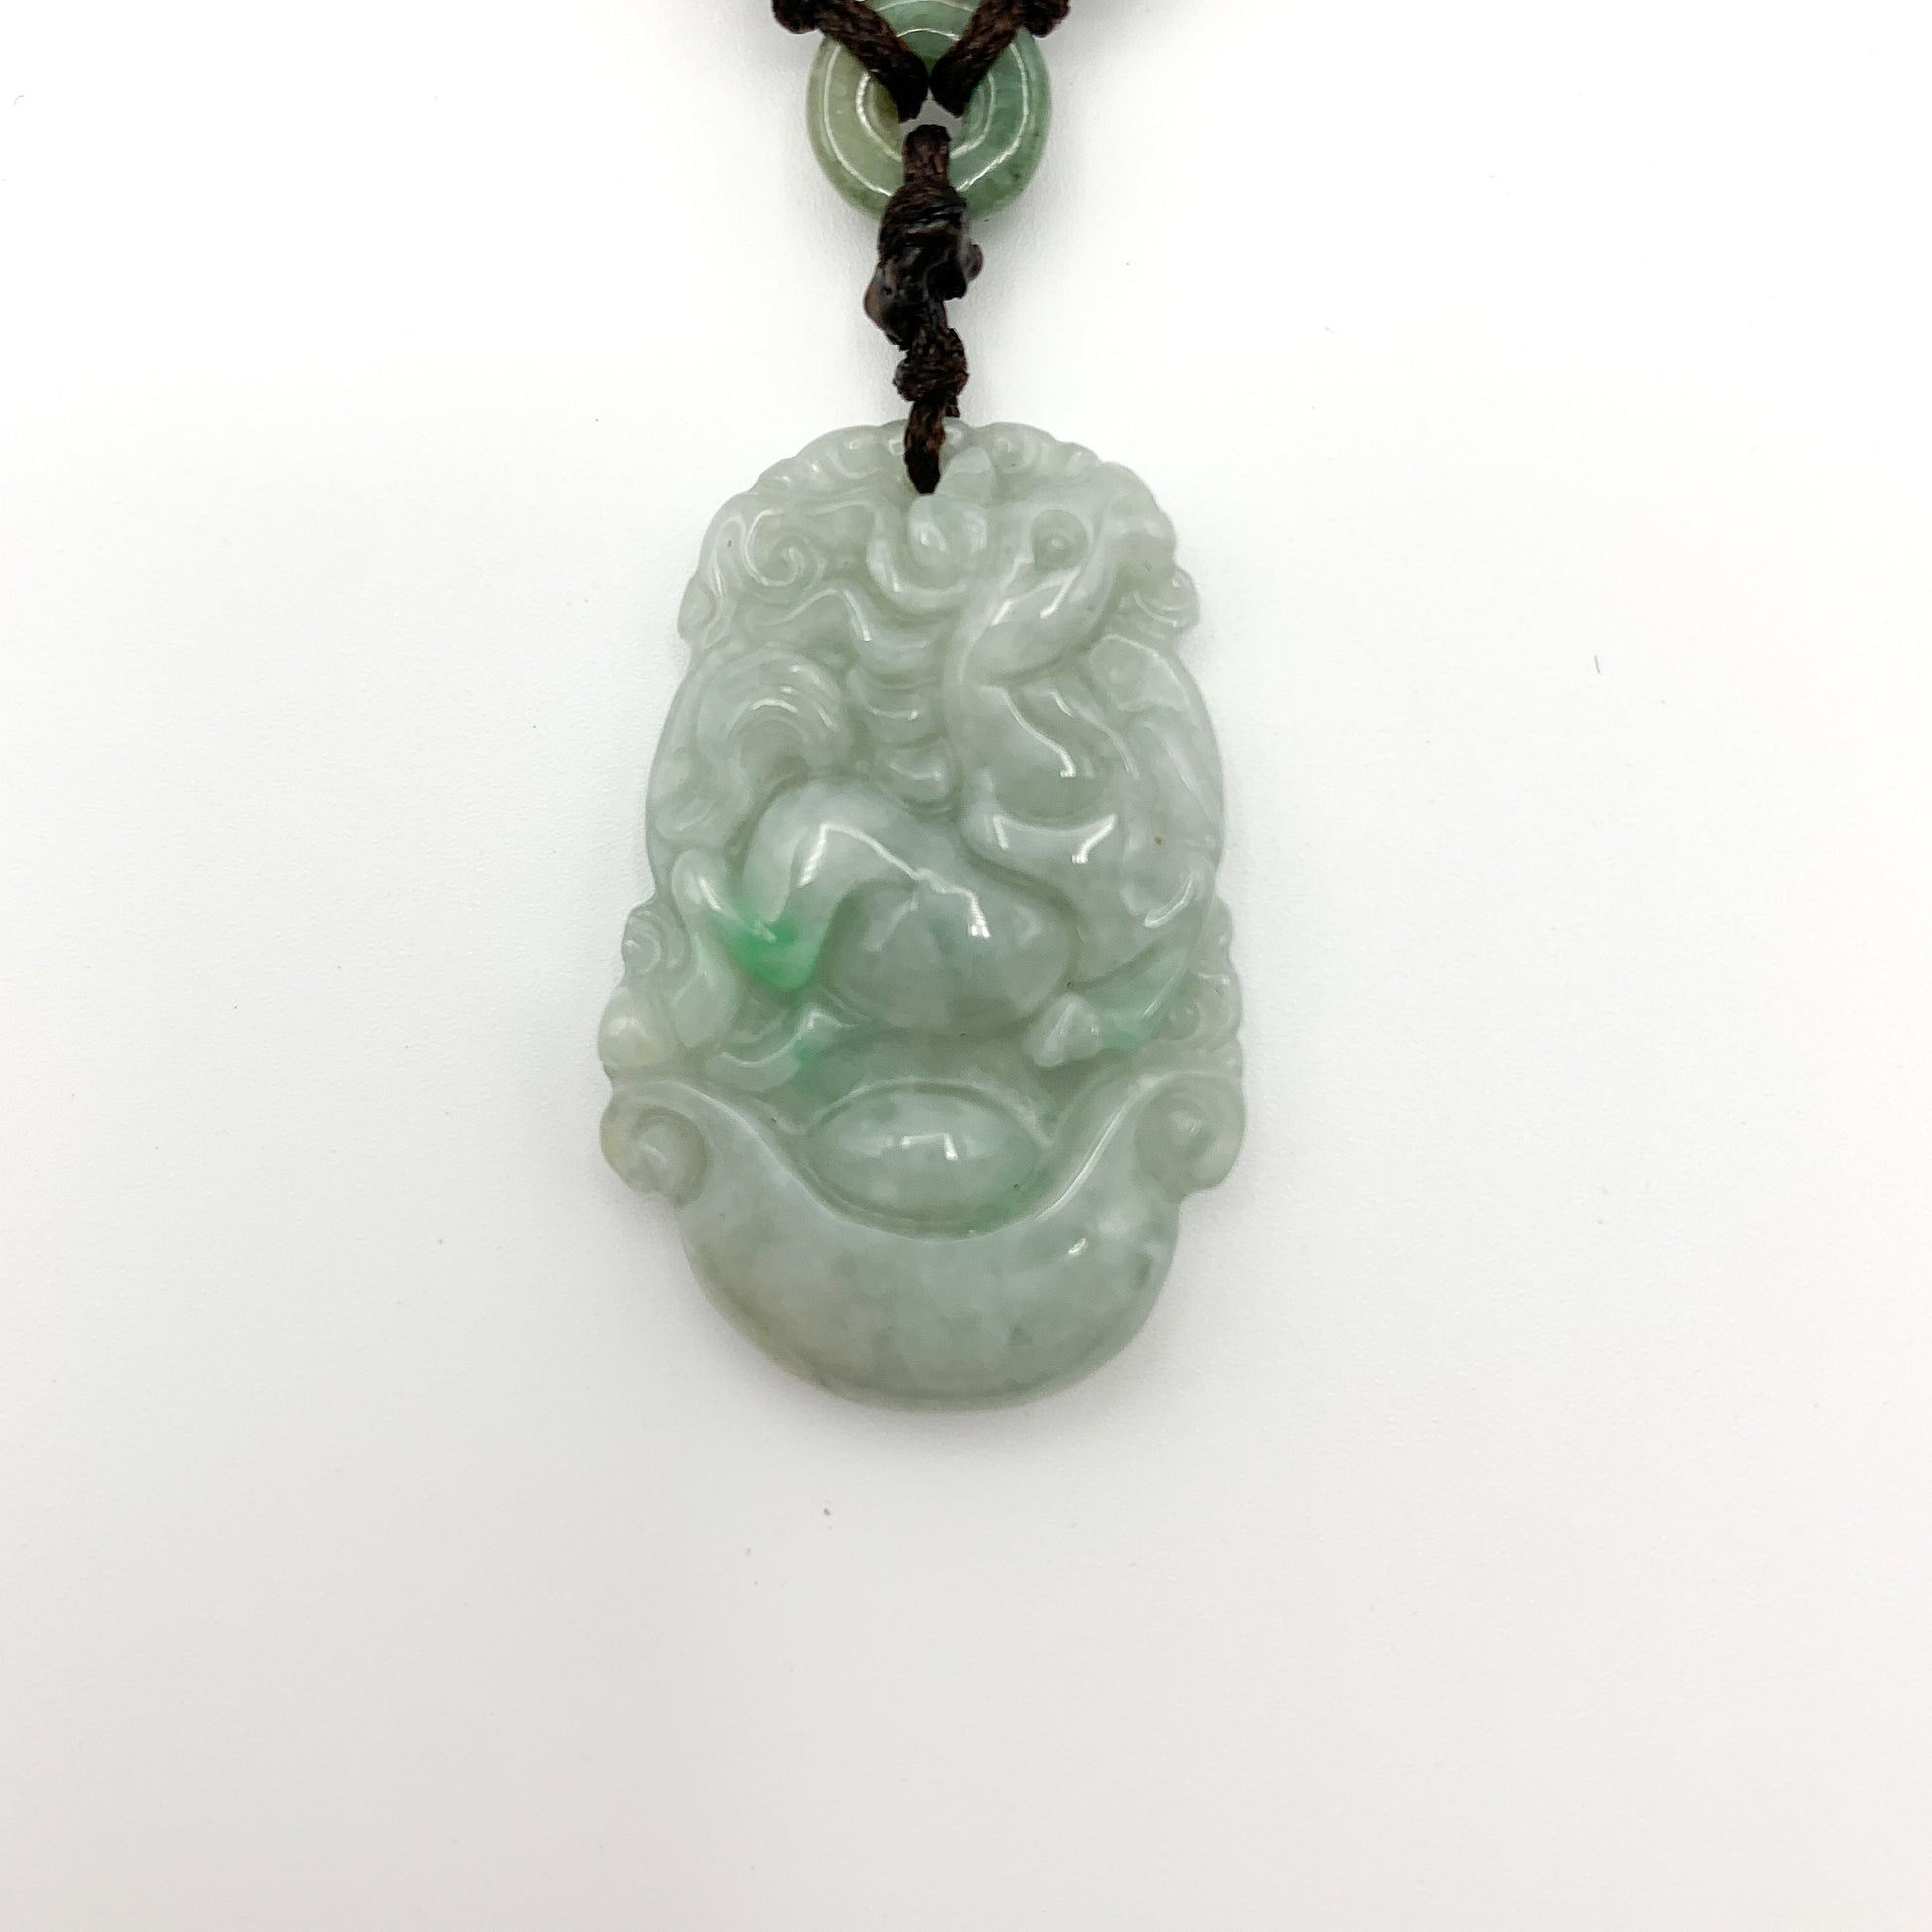 Horse Jade Chinese Zodiac Rustic Carved Pendant Necklace, YW-0321-1645571195 - AriaDesignCollection